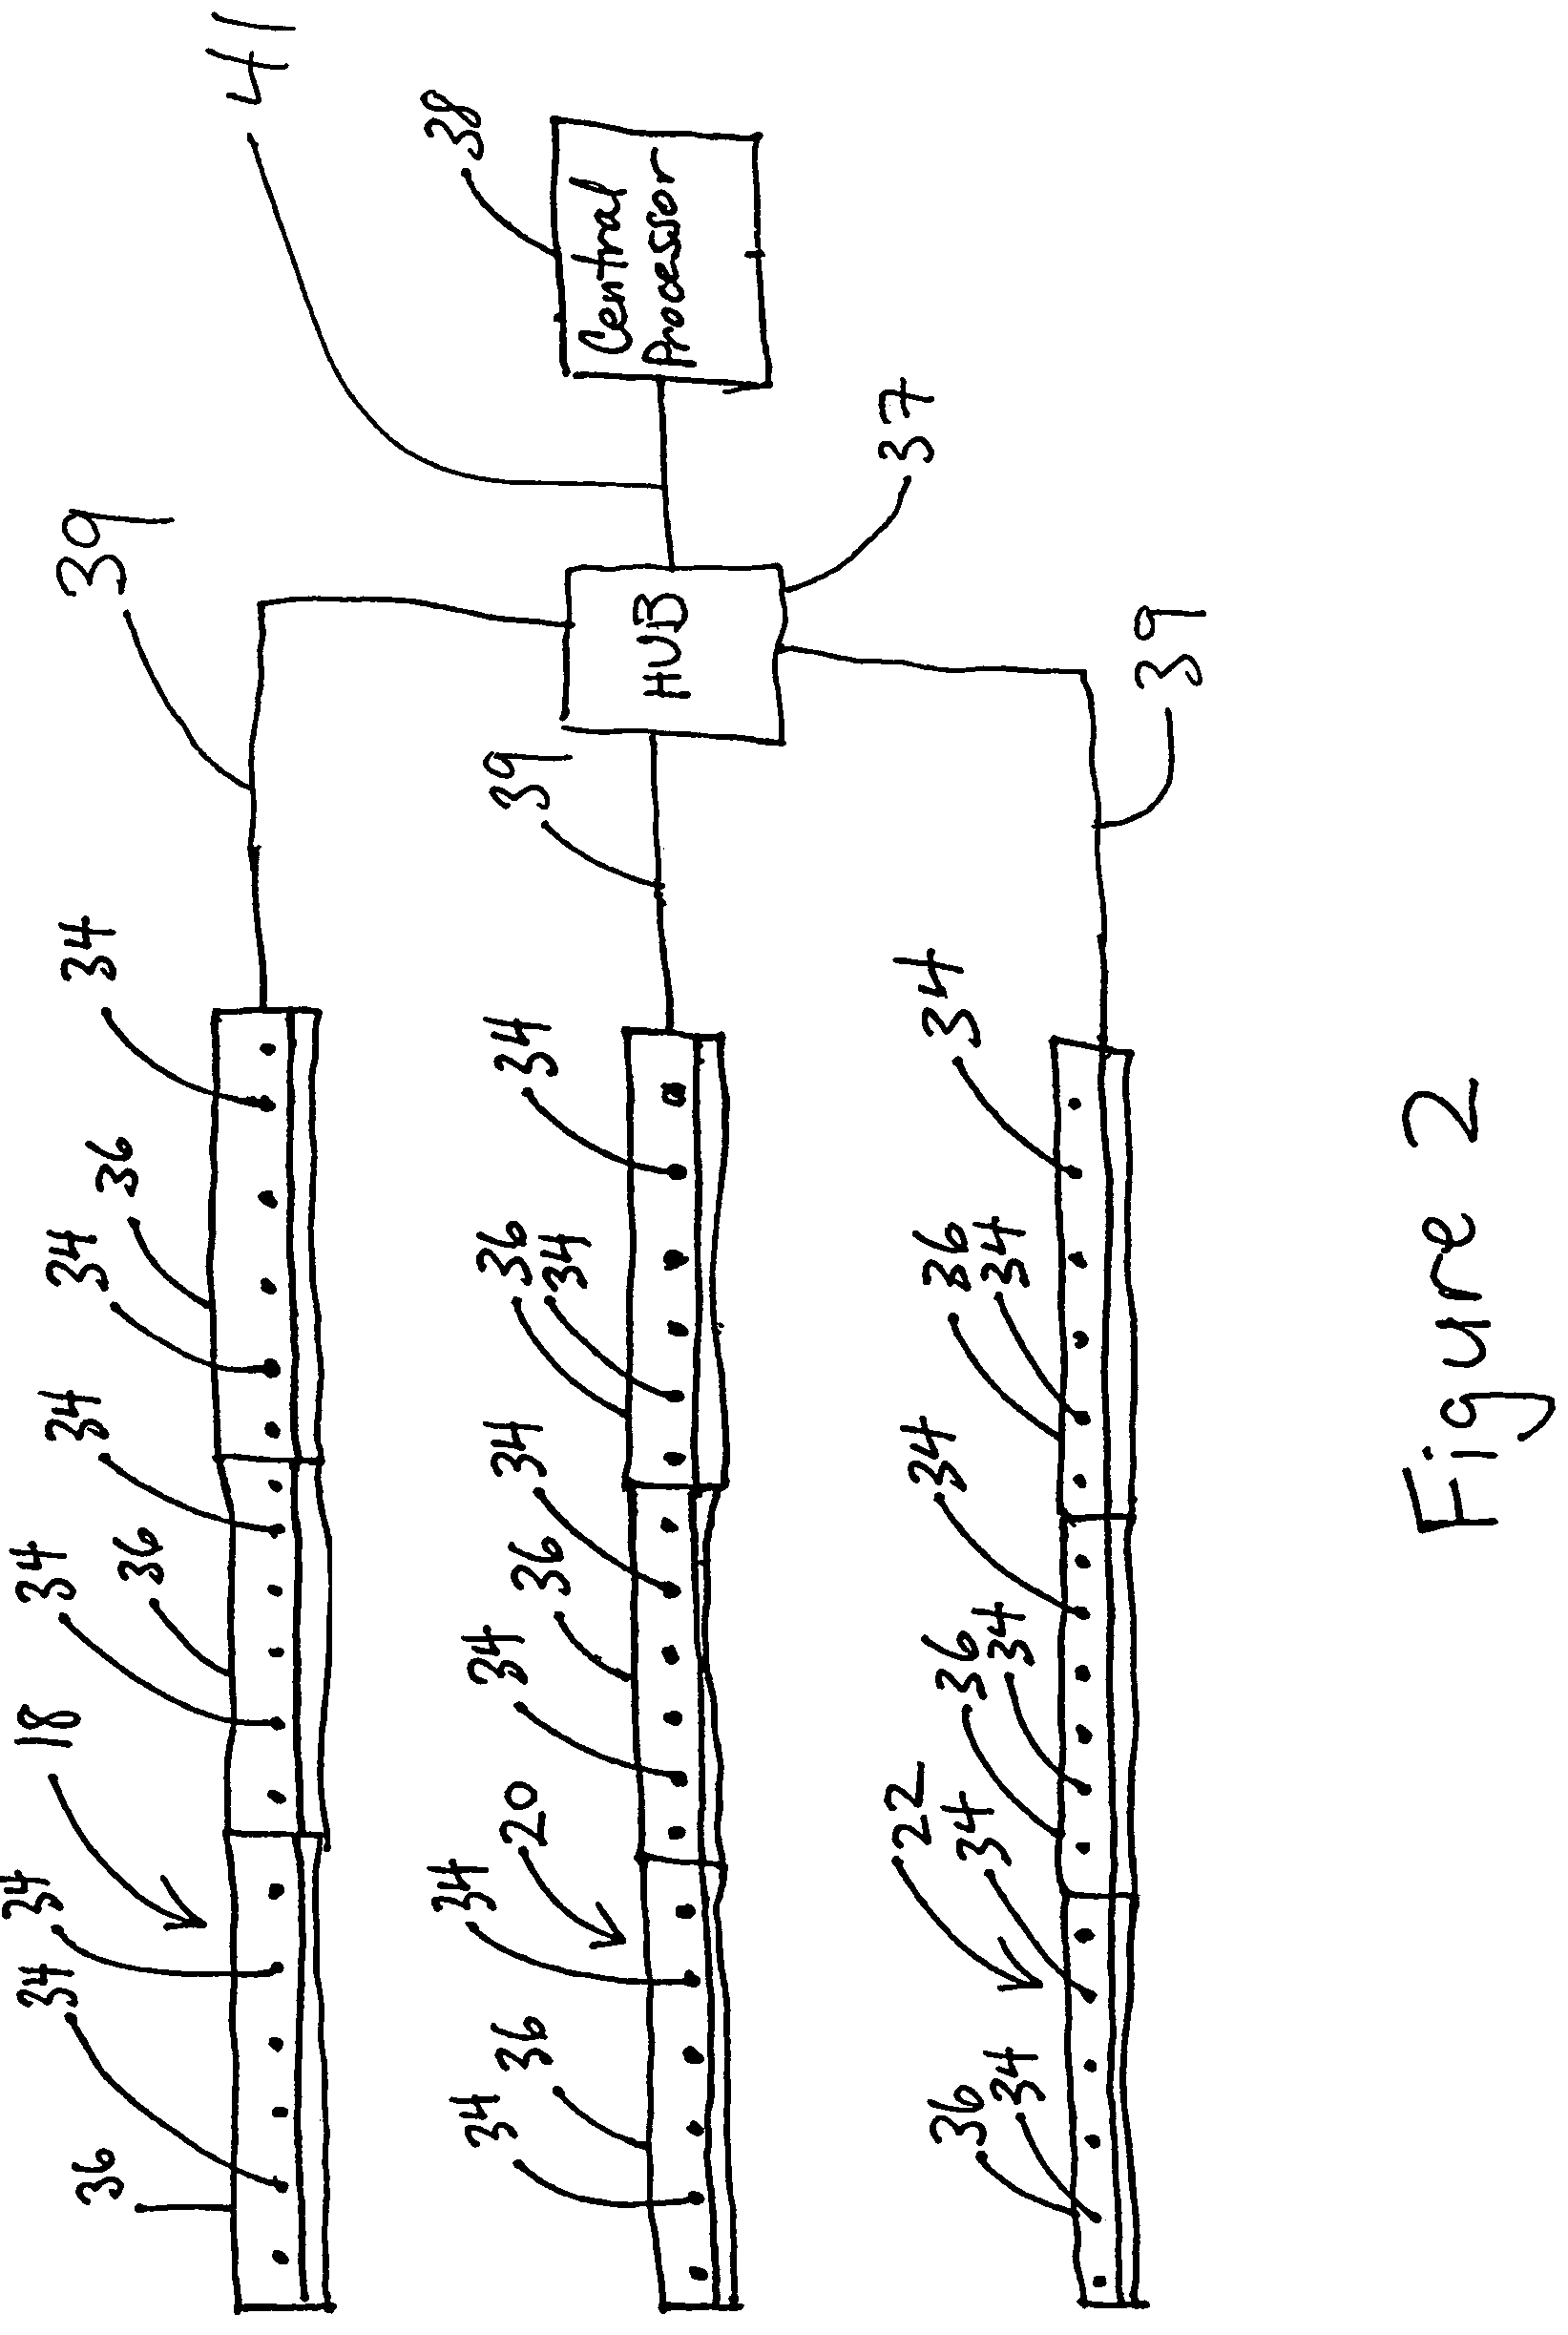 Device for measuring package size